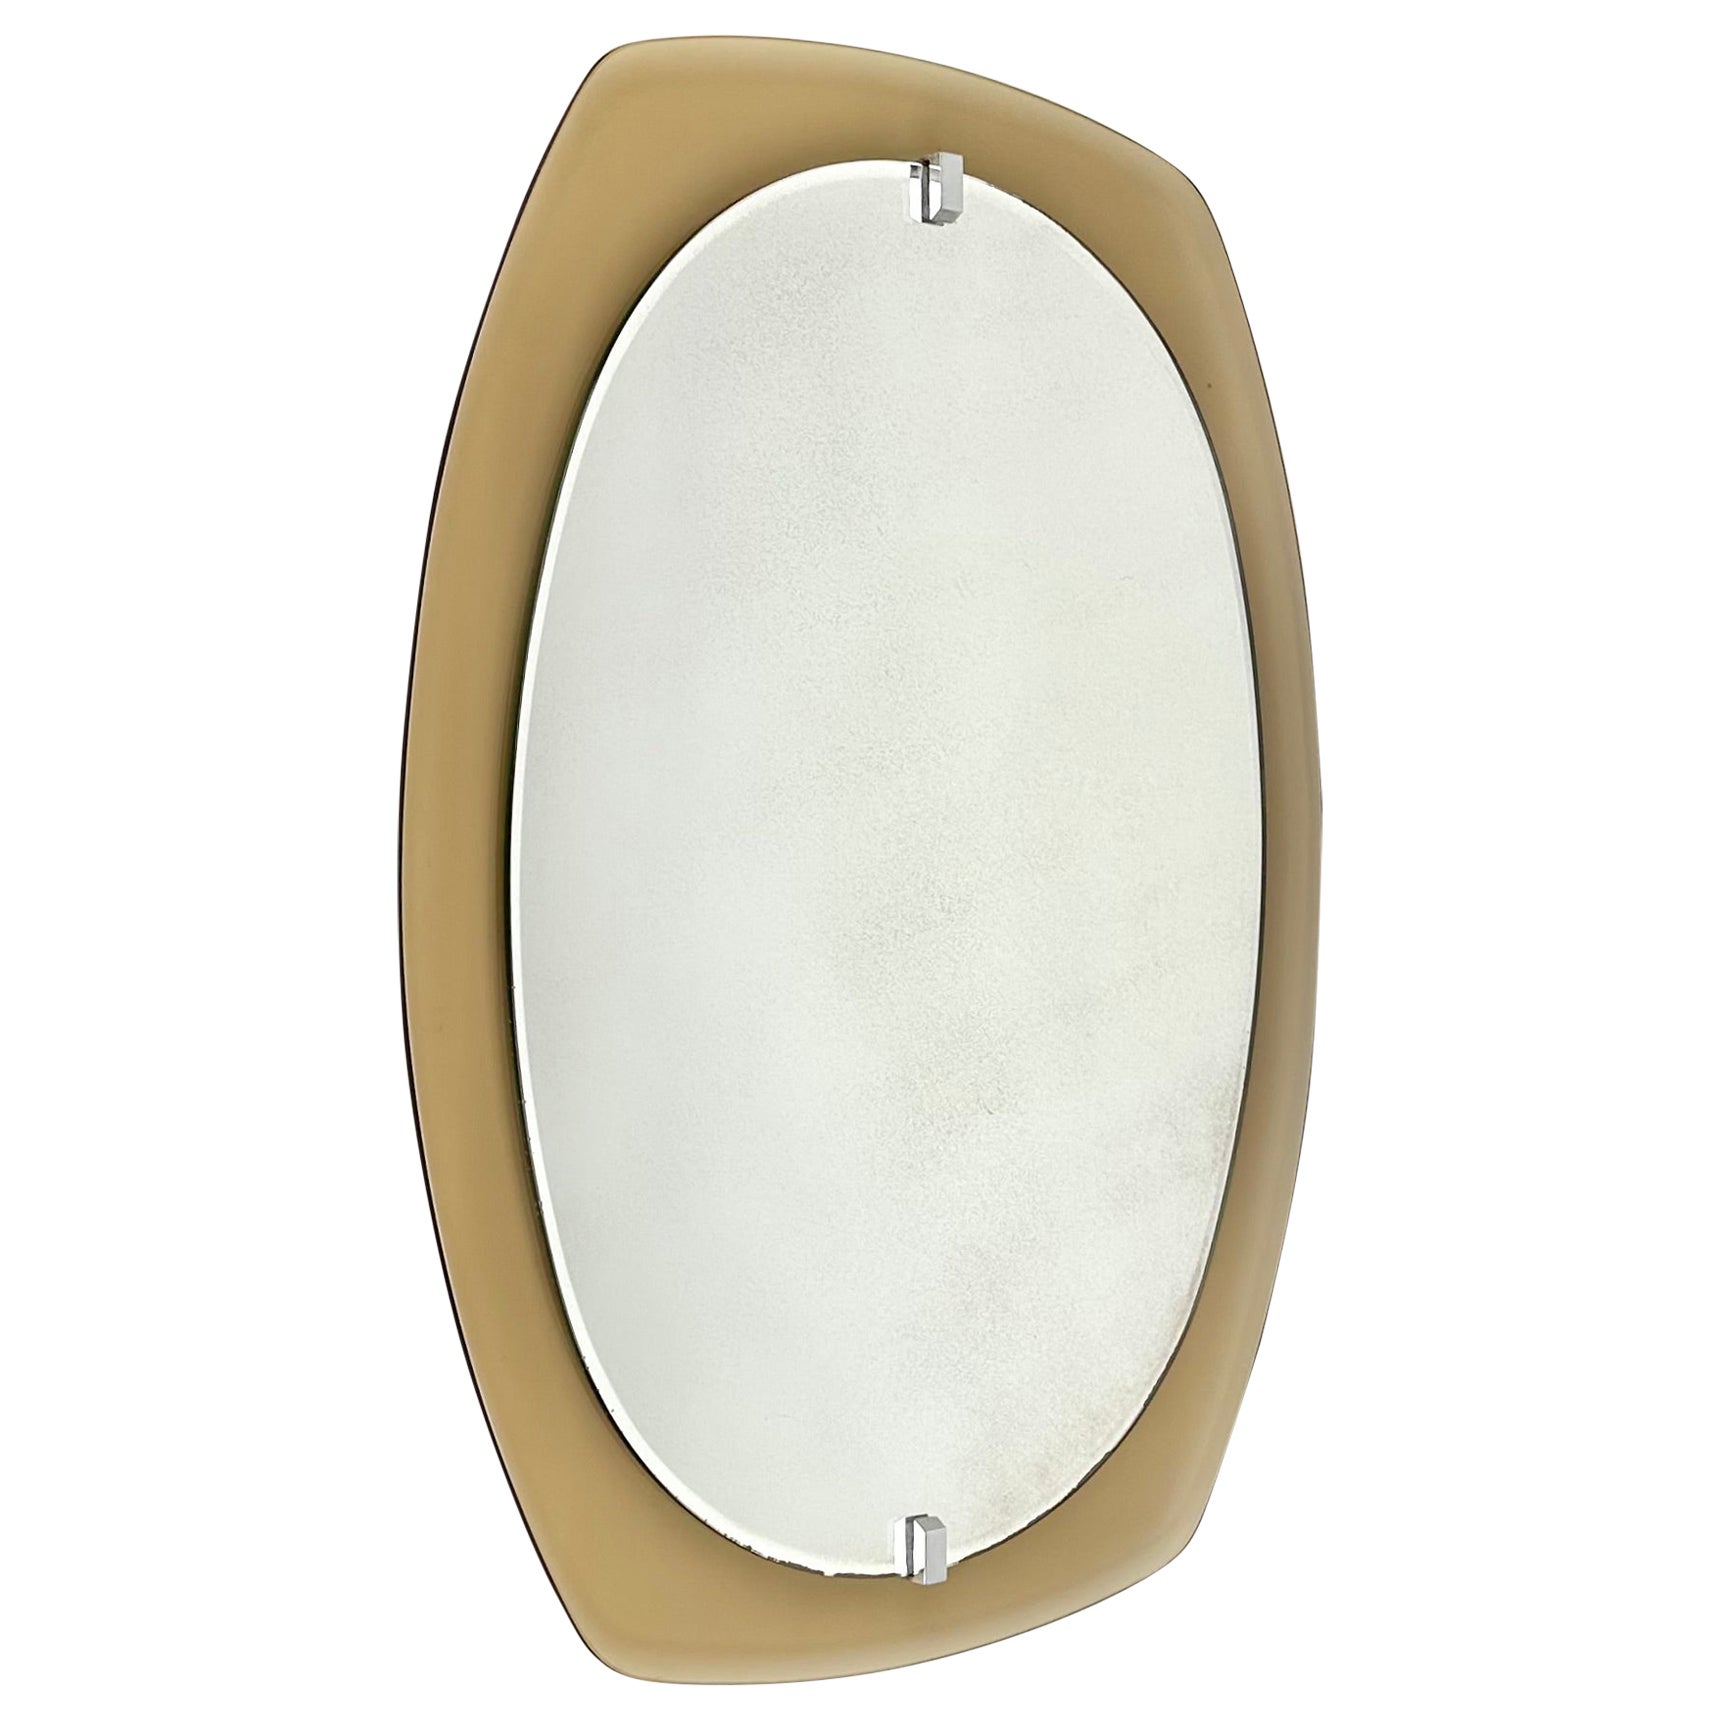 Midcentury Wall Mirror Beveled Smoked Glass Frame by Veca, Italy 1970s For Sale